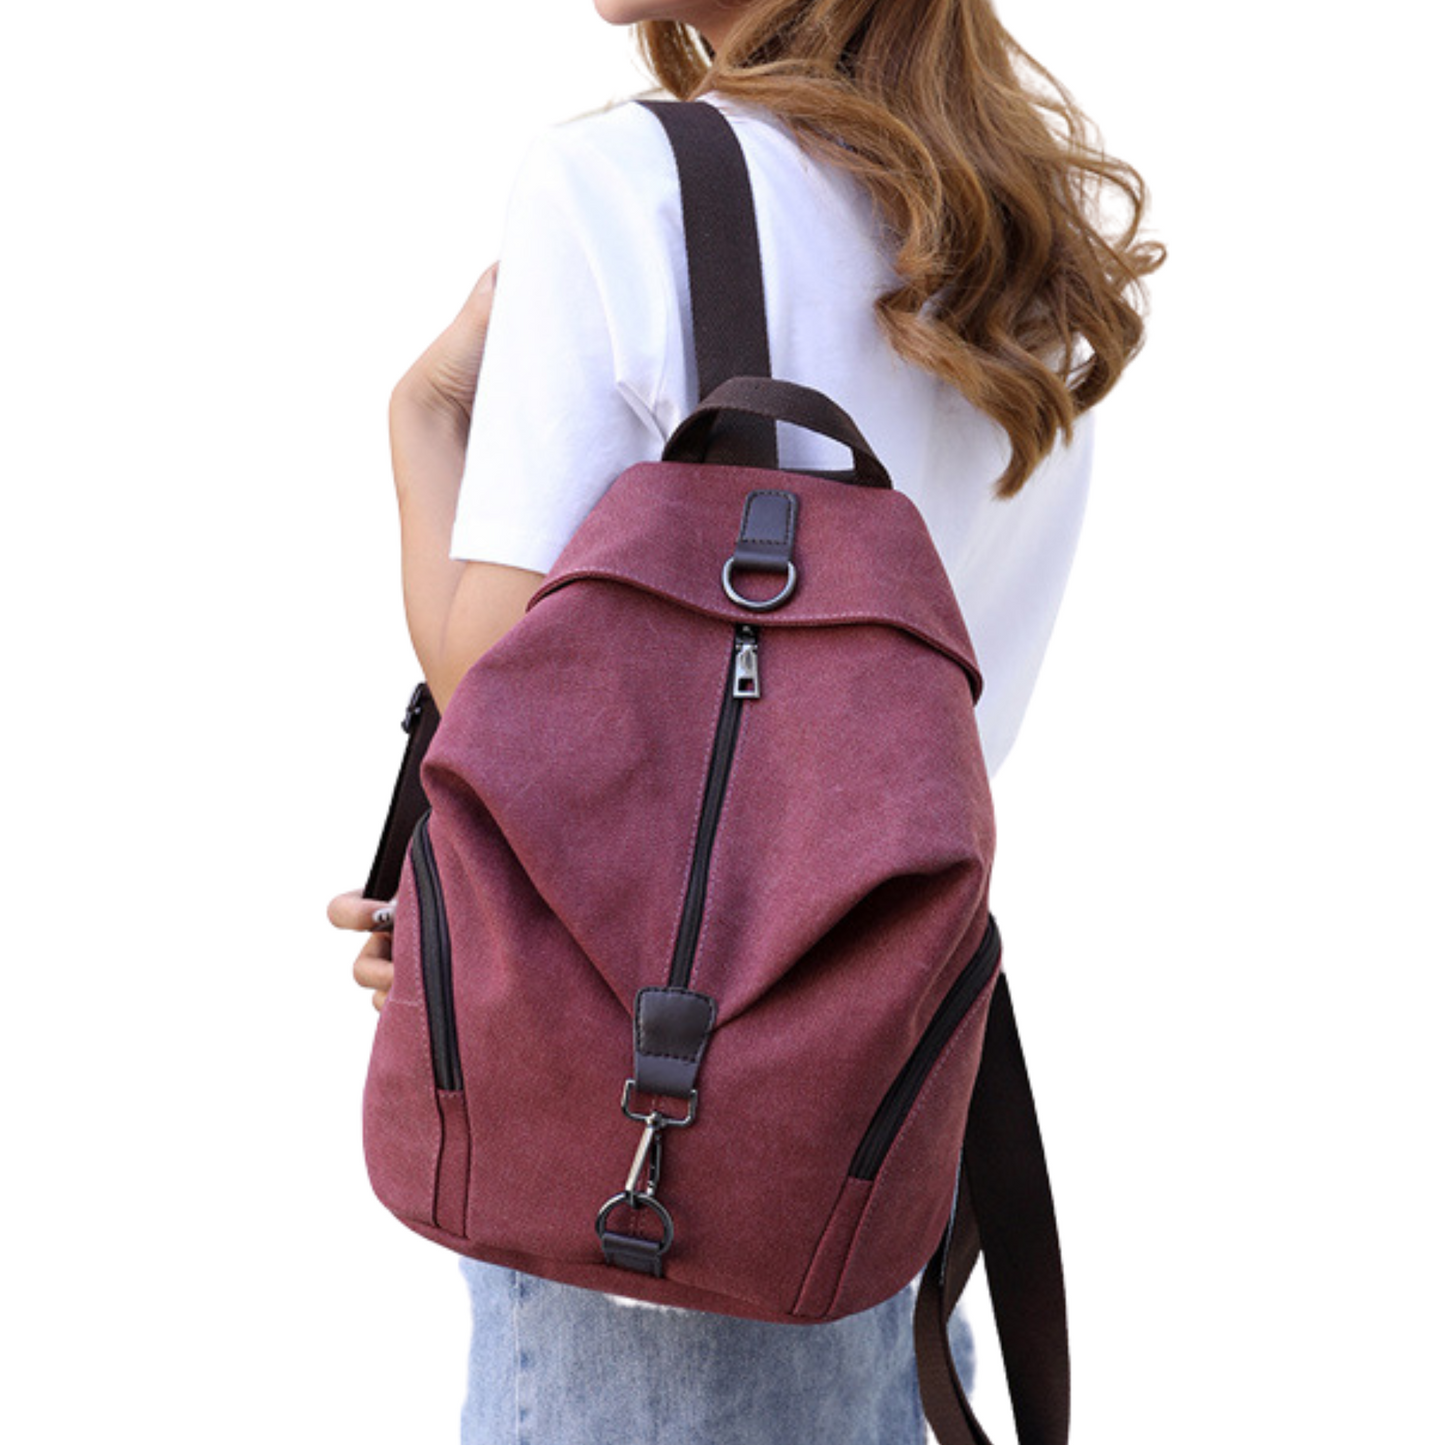 Men's Women's Canvas Carry Bag Sports Bags Backpack